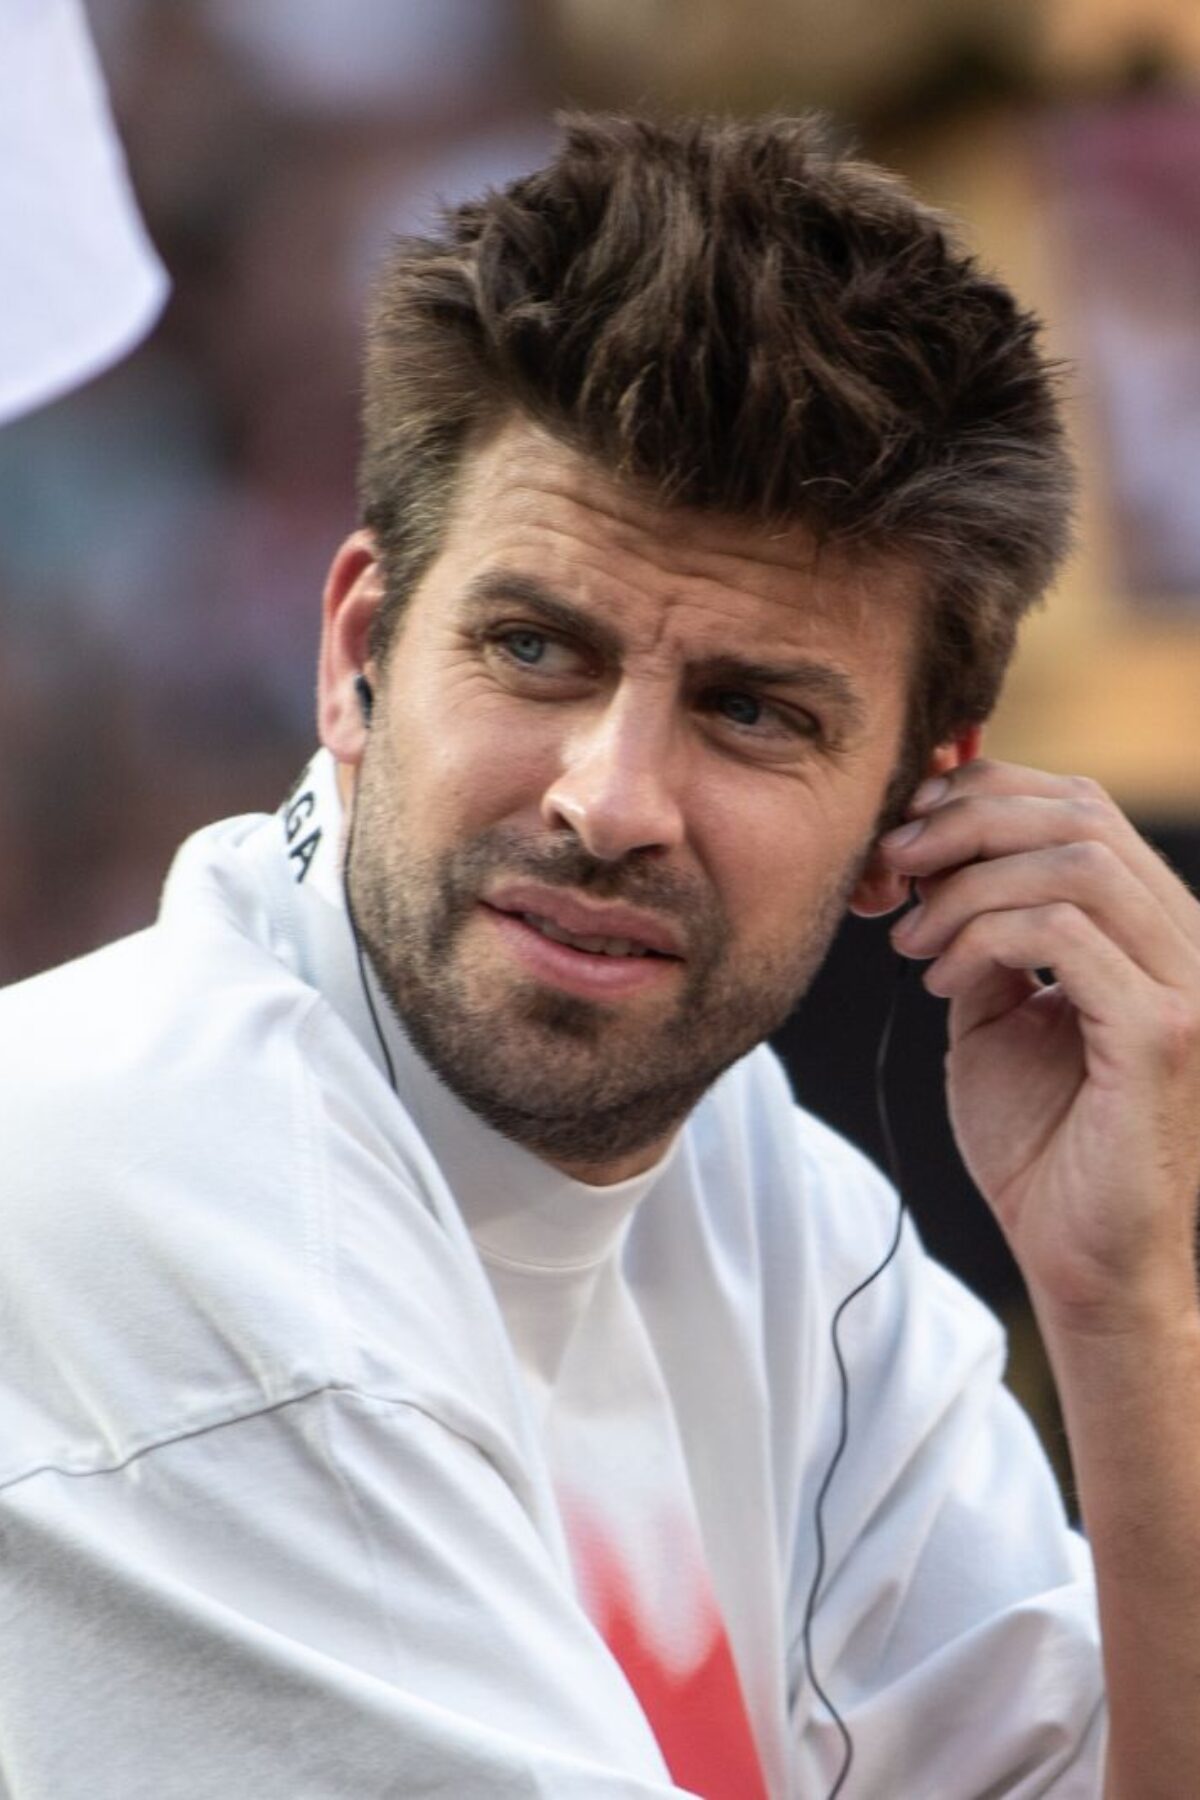 MADRID, SPAIN - 2023/07/29: Former soccer player Gerard Piqué is seen during the Kings and Queens finals at the Civitas Metropolitano Stadium. The Kings and Queens League is the men's and women's soccer league created by Gerard Pique and Ibai Llanos, made up of teams that will be chaired by streamers and former soccer players, who will be in charge of managing each of the participating teams. (Photo by Marcos del Mazo/LightRocket via Getty Images)